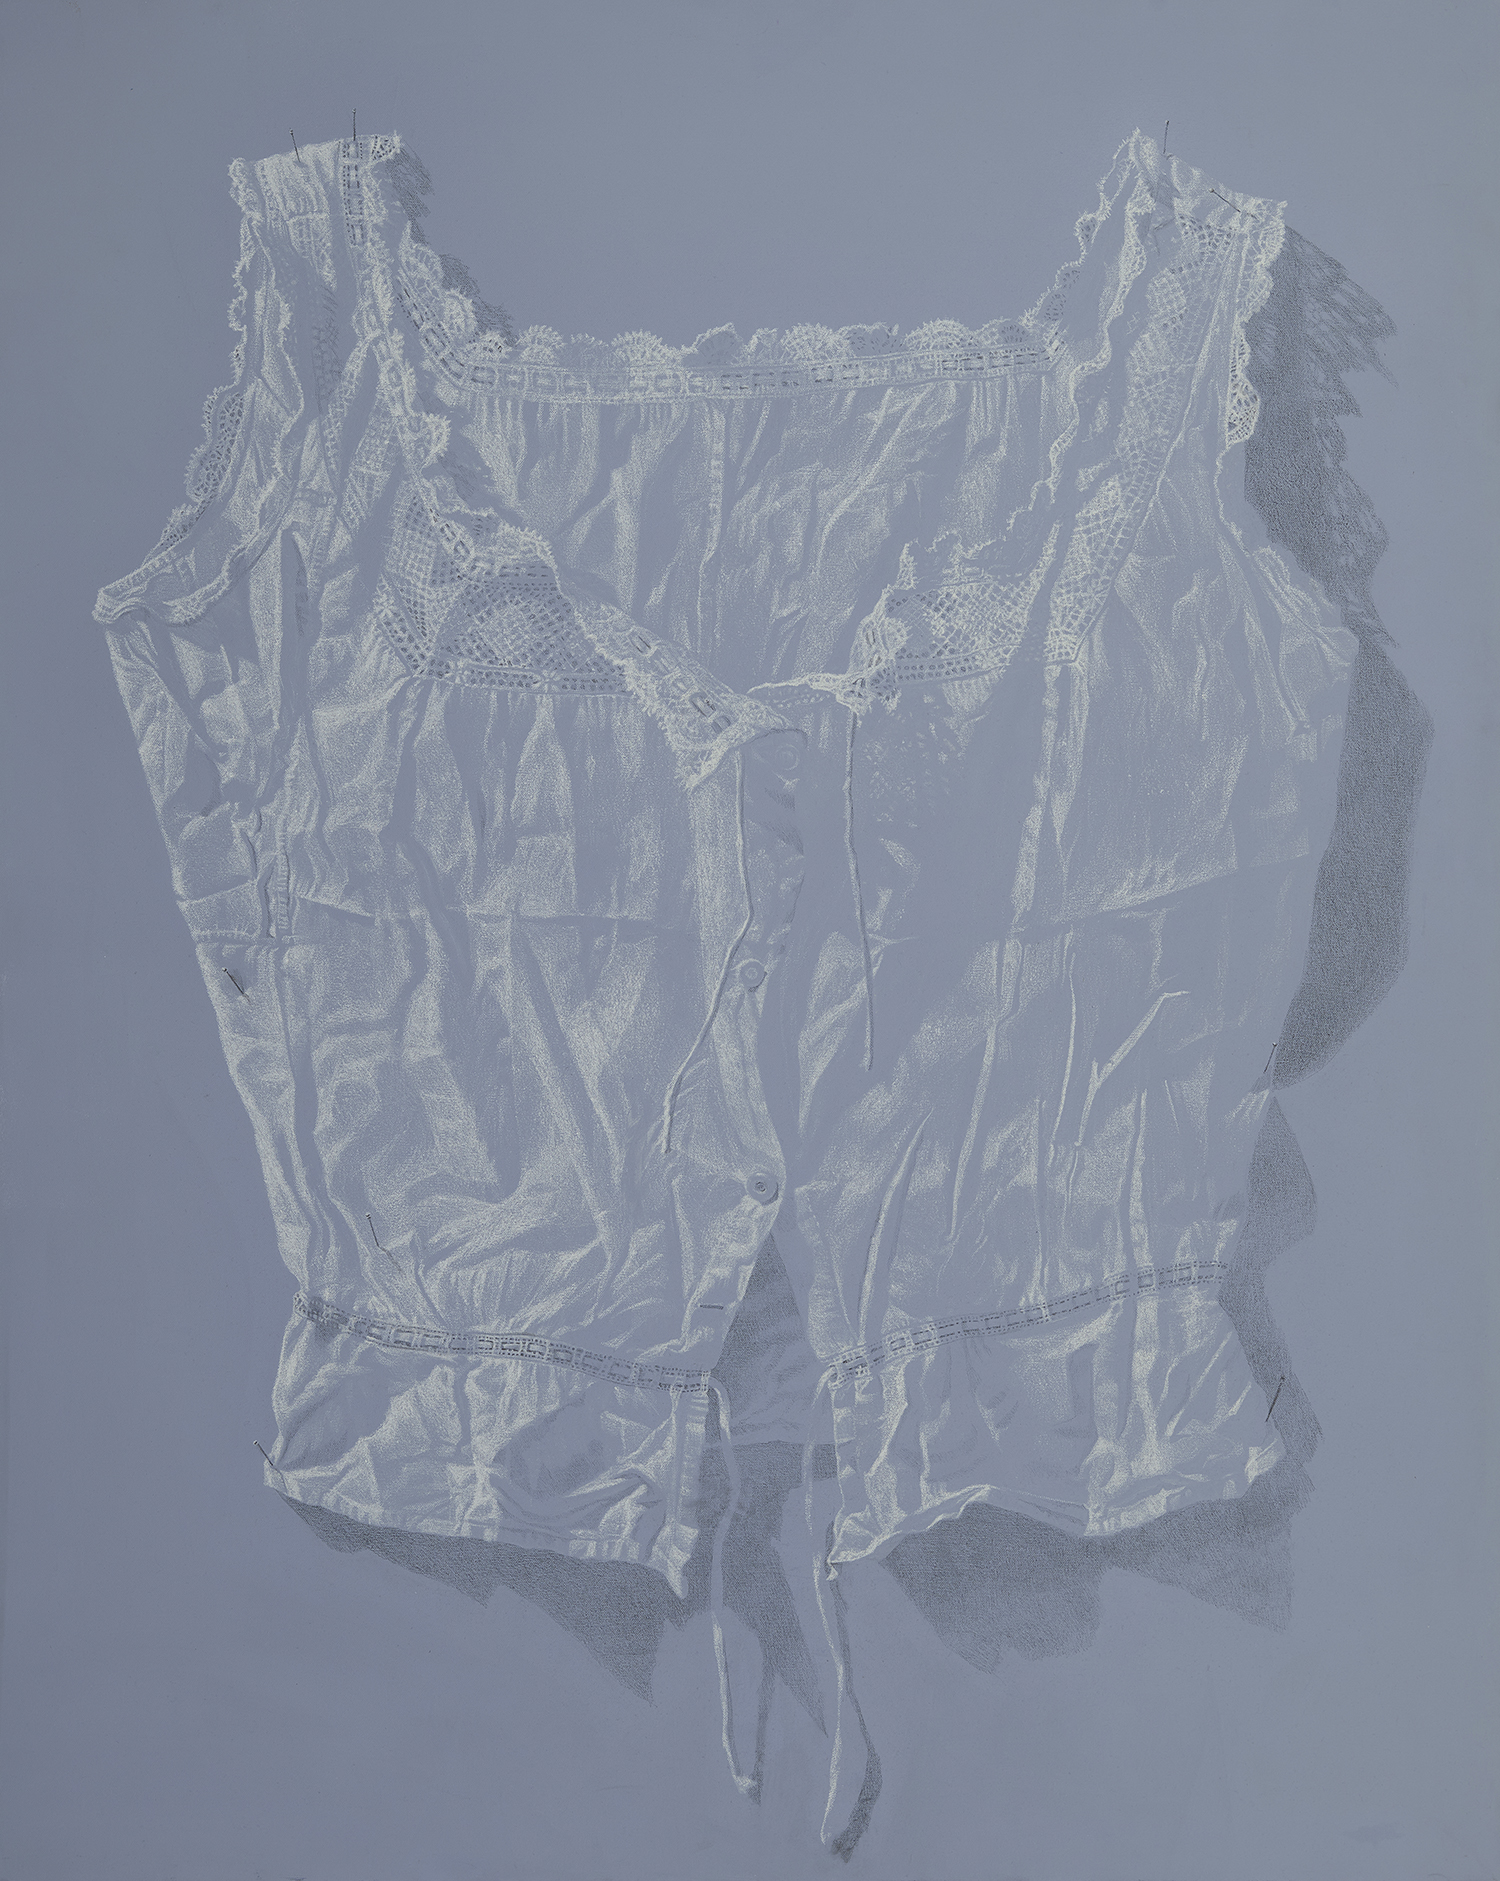 'Dentelles bustier', Anastassia Tetrel, Charcoal and Pastel on Canvas, 190 x 140 cm